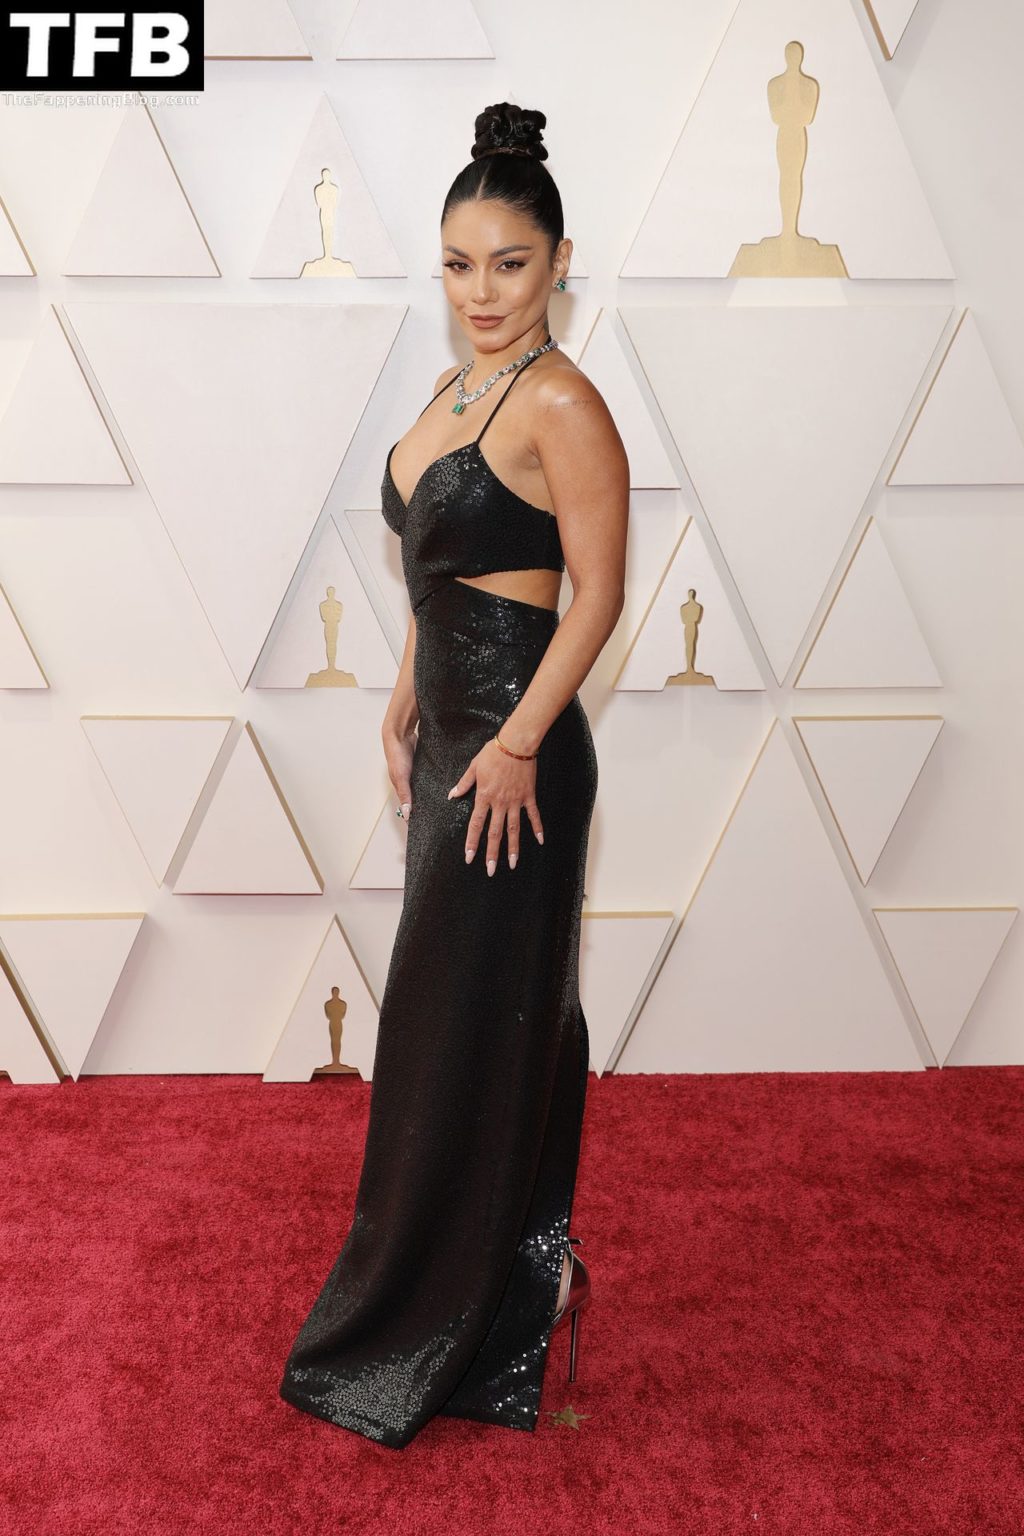 Vanessa Hudgens Sexy The Fappening Blog 22 4 1024x1536 - Vanessa Hudgens Poses on the Red Carpet at the 94th Annual Academy Awards (83 Photos)